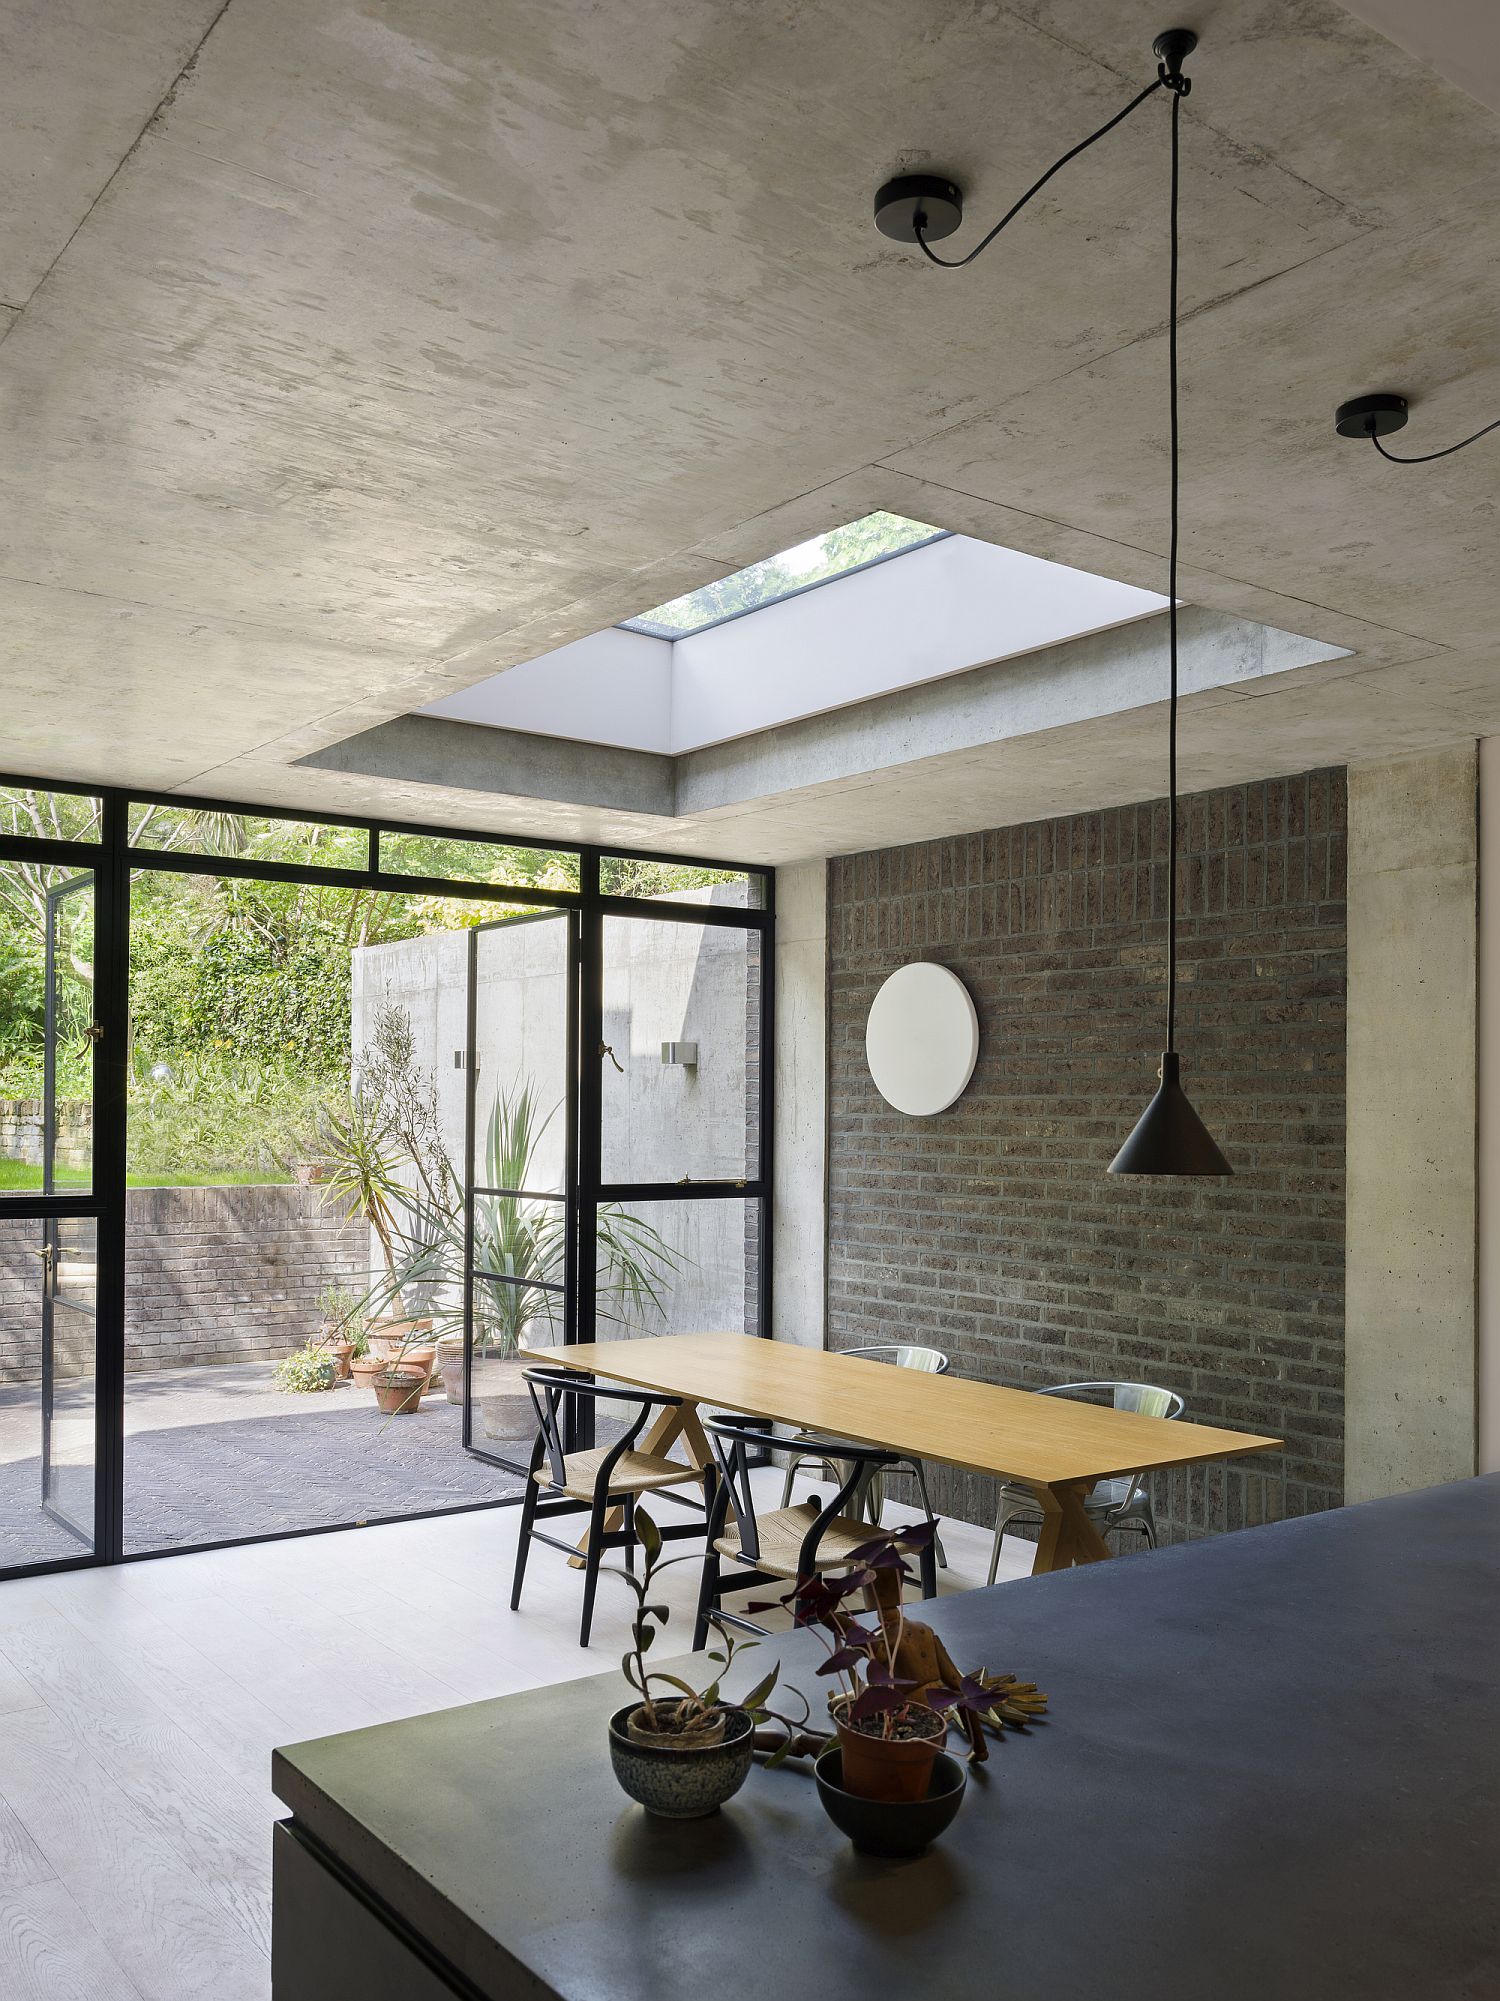 Concrete-is-used-elegantly-inside-the-kitchen-area